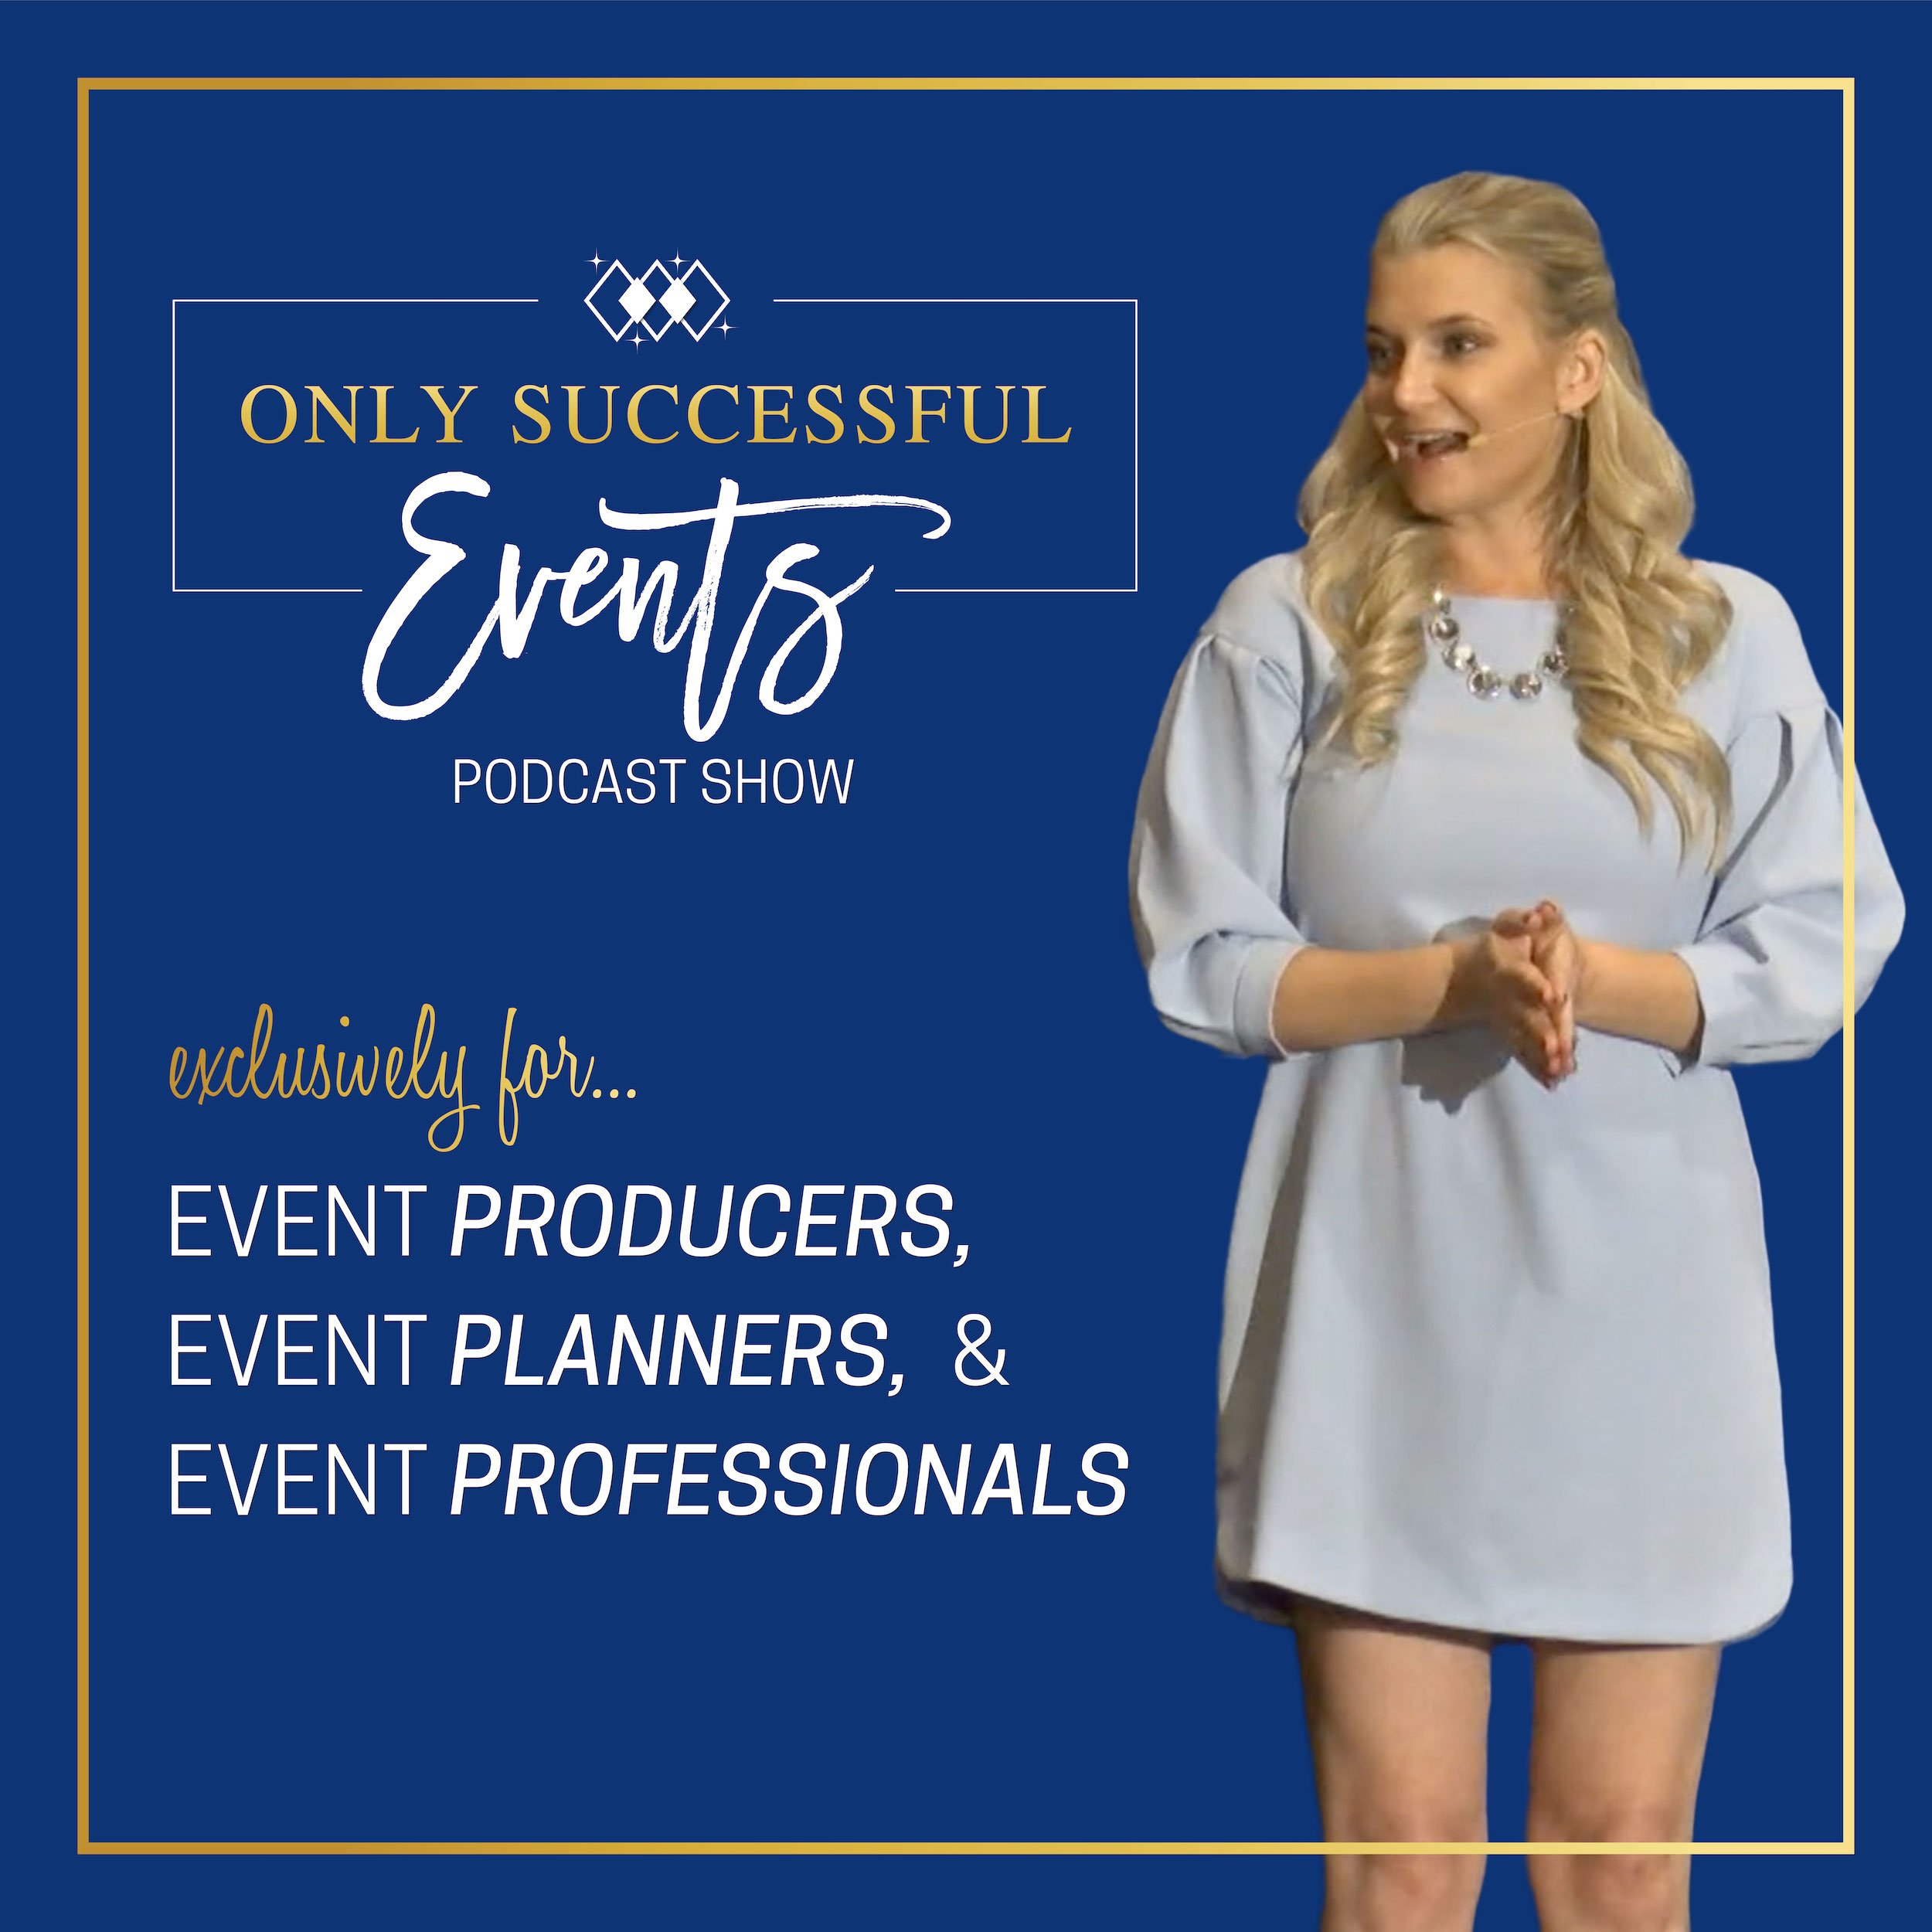 Event planning podcast cover featuring a Woman with blonde hair in a light blue dress speaking on the only successful event show. Blue background with text that reads exclusively for event producers, planners, and professionals